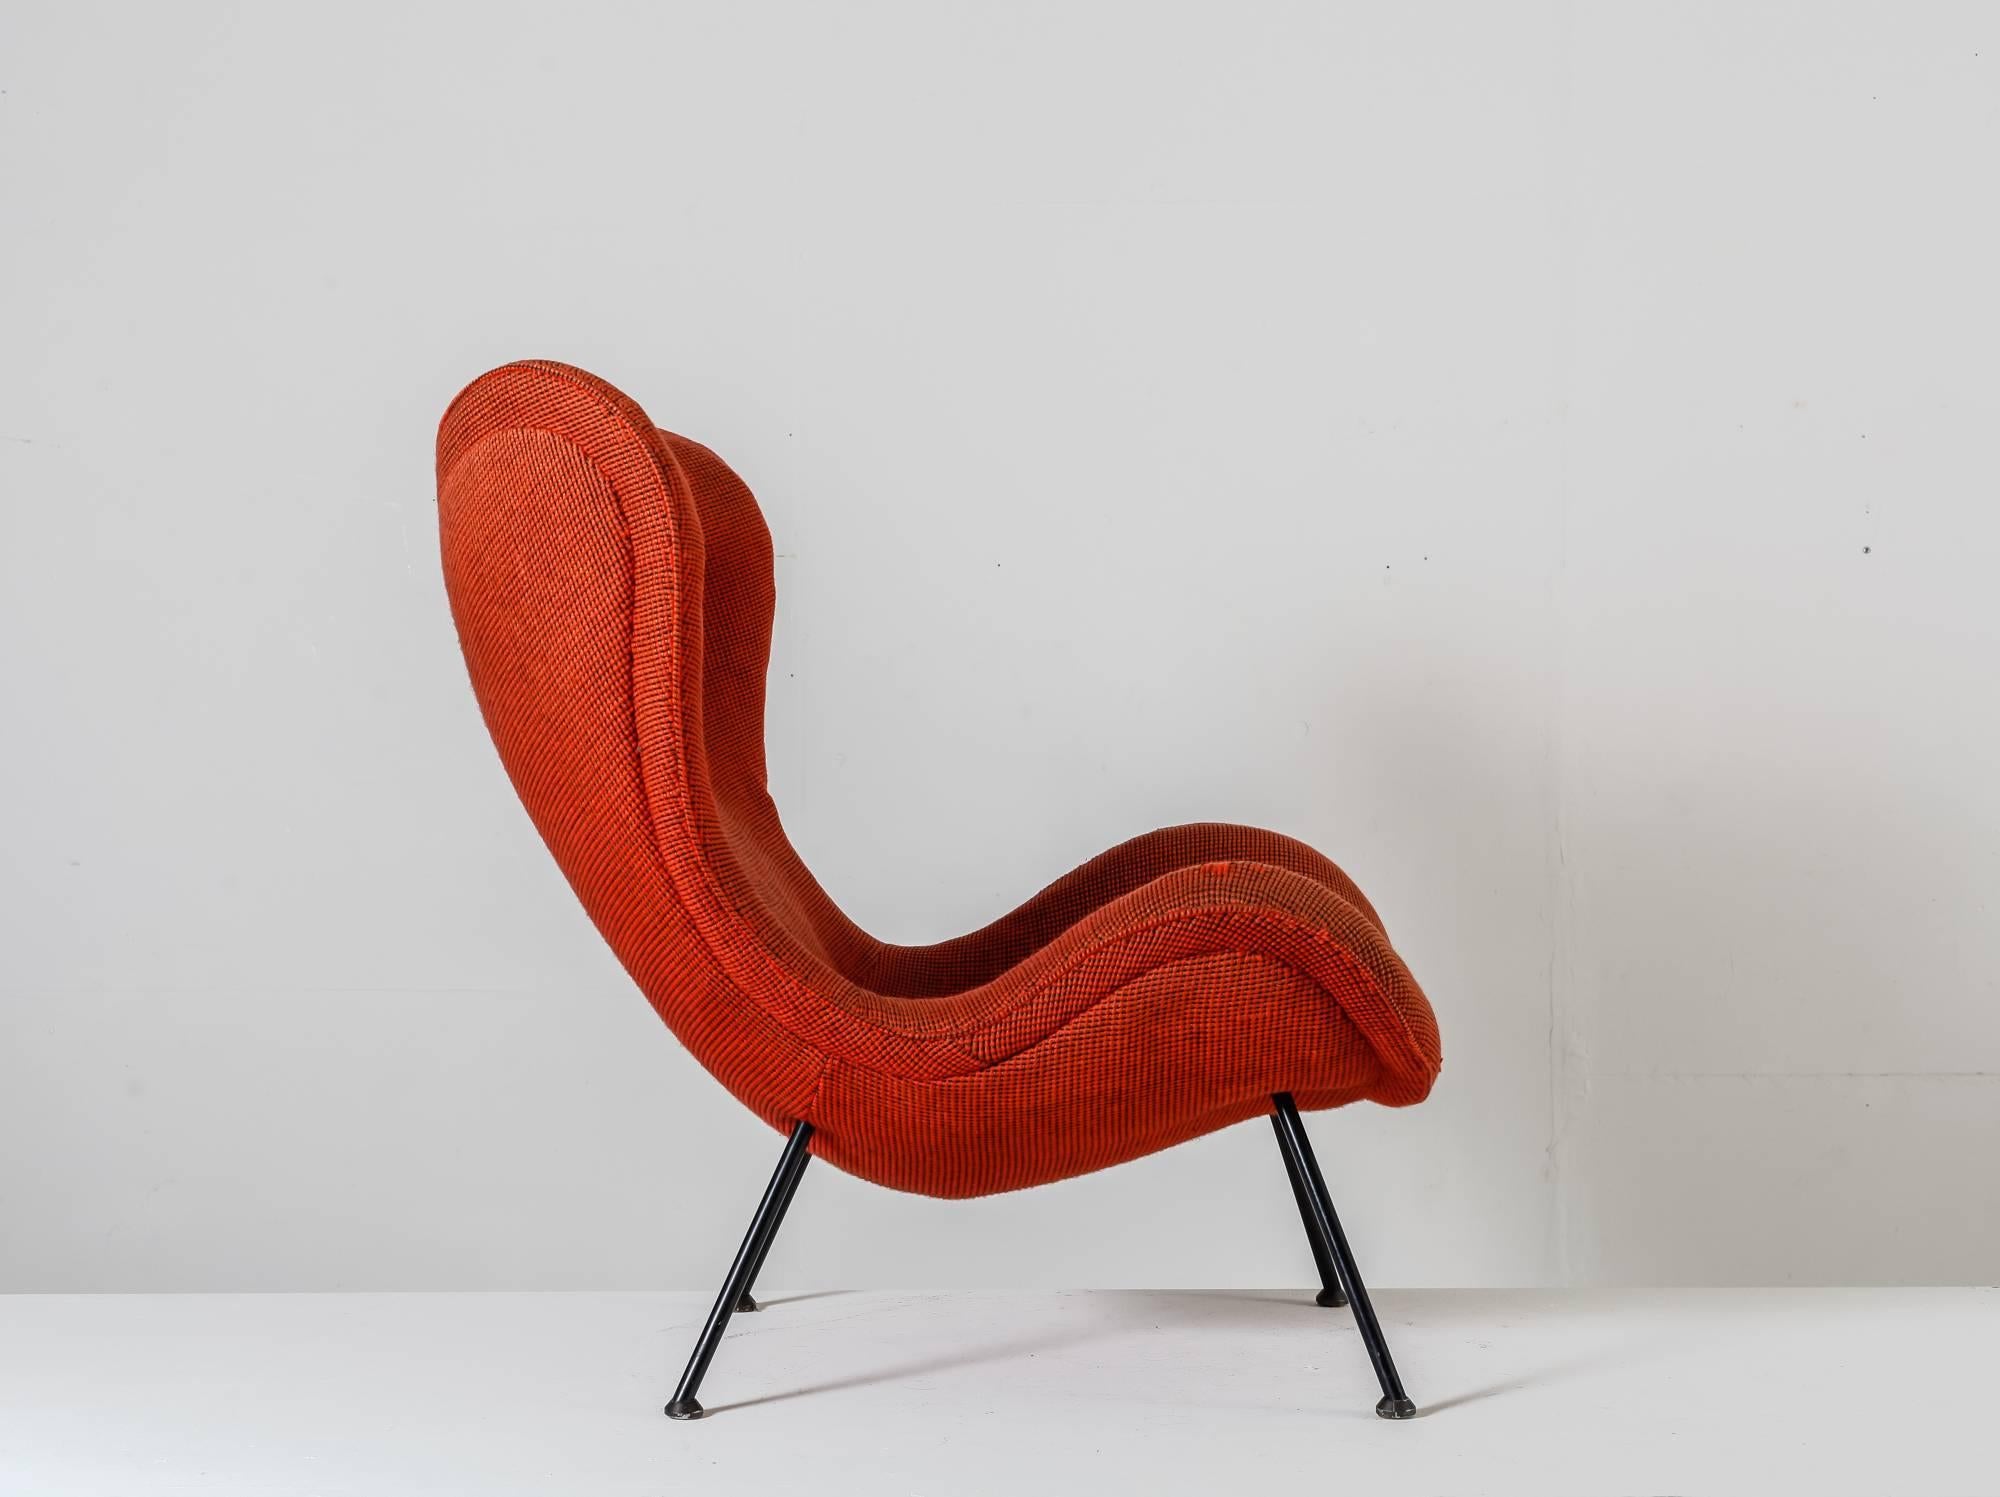 A red 'Madame' lounge chair with a high wingback by German designer Fritz Neth for Sitzformbau, Kassel, in the 1950s. The chair is made of a black lacquered tubular frame and has a red fabric upholstery.

The fabric of the chair has aged and the